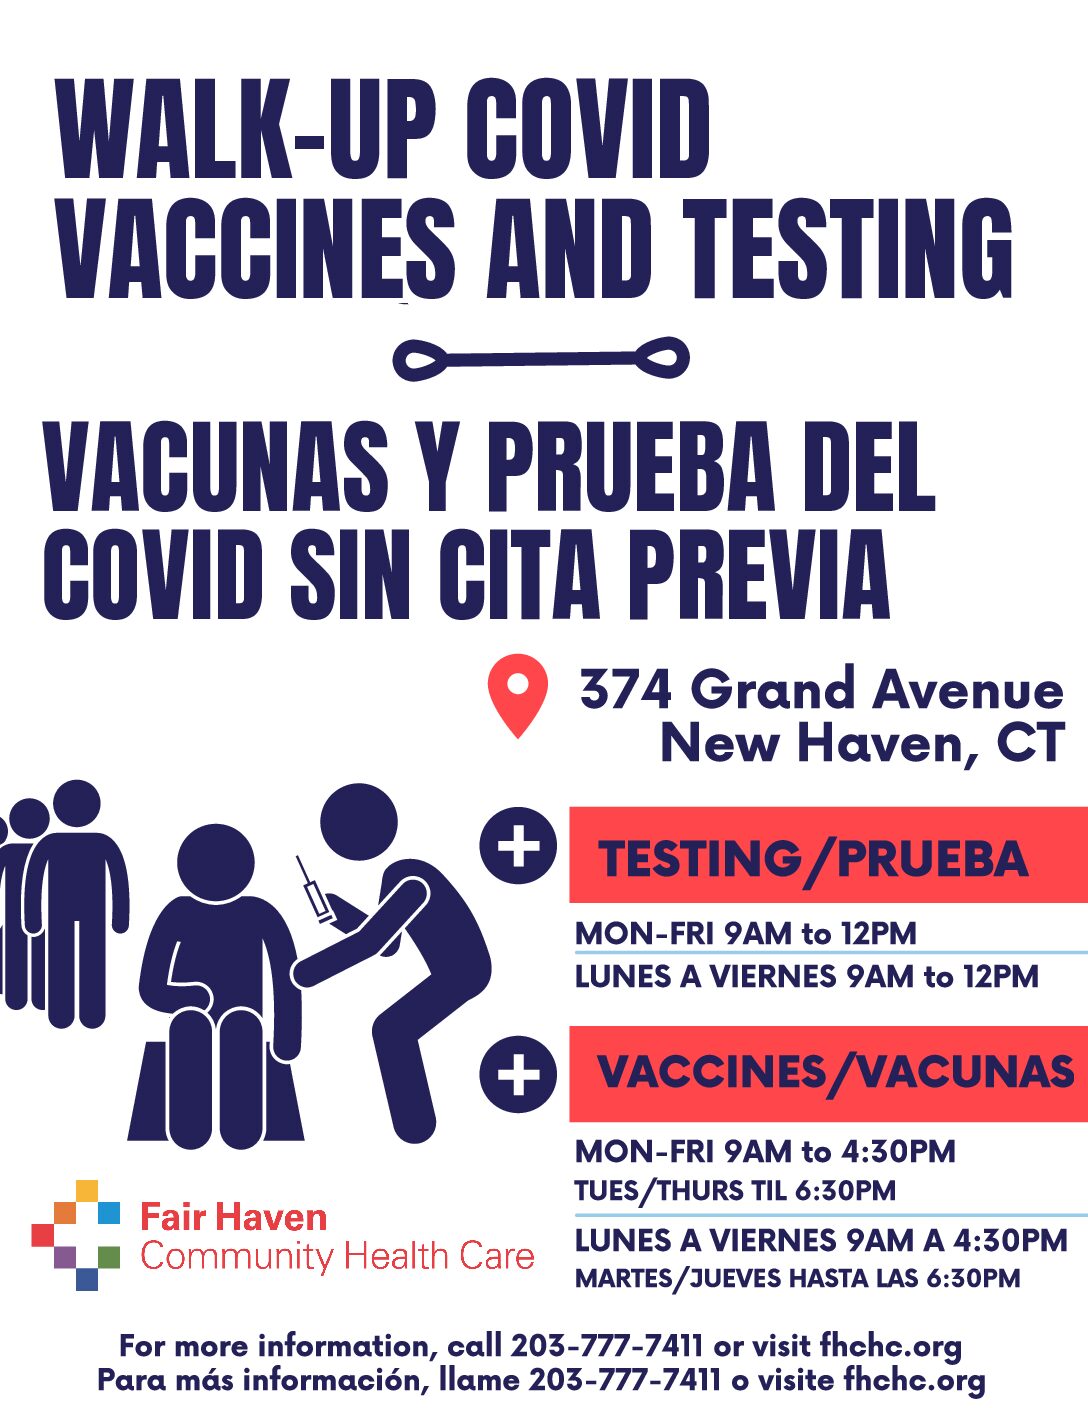 COVID Vaccine and Testing Update 8/24/21